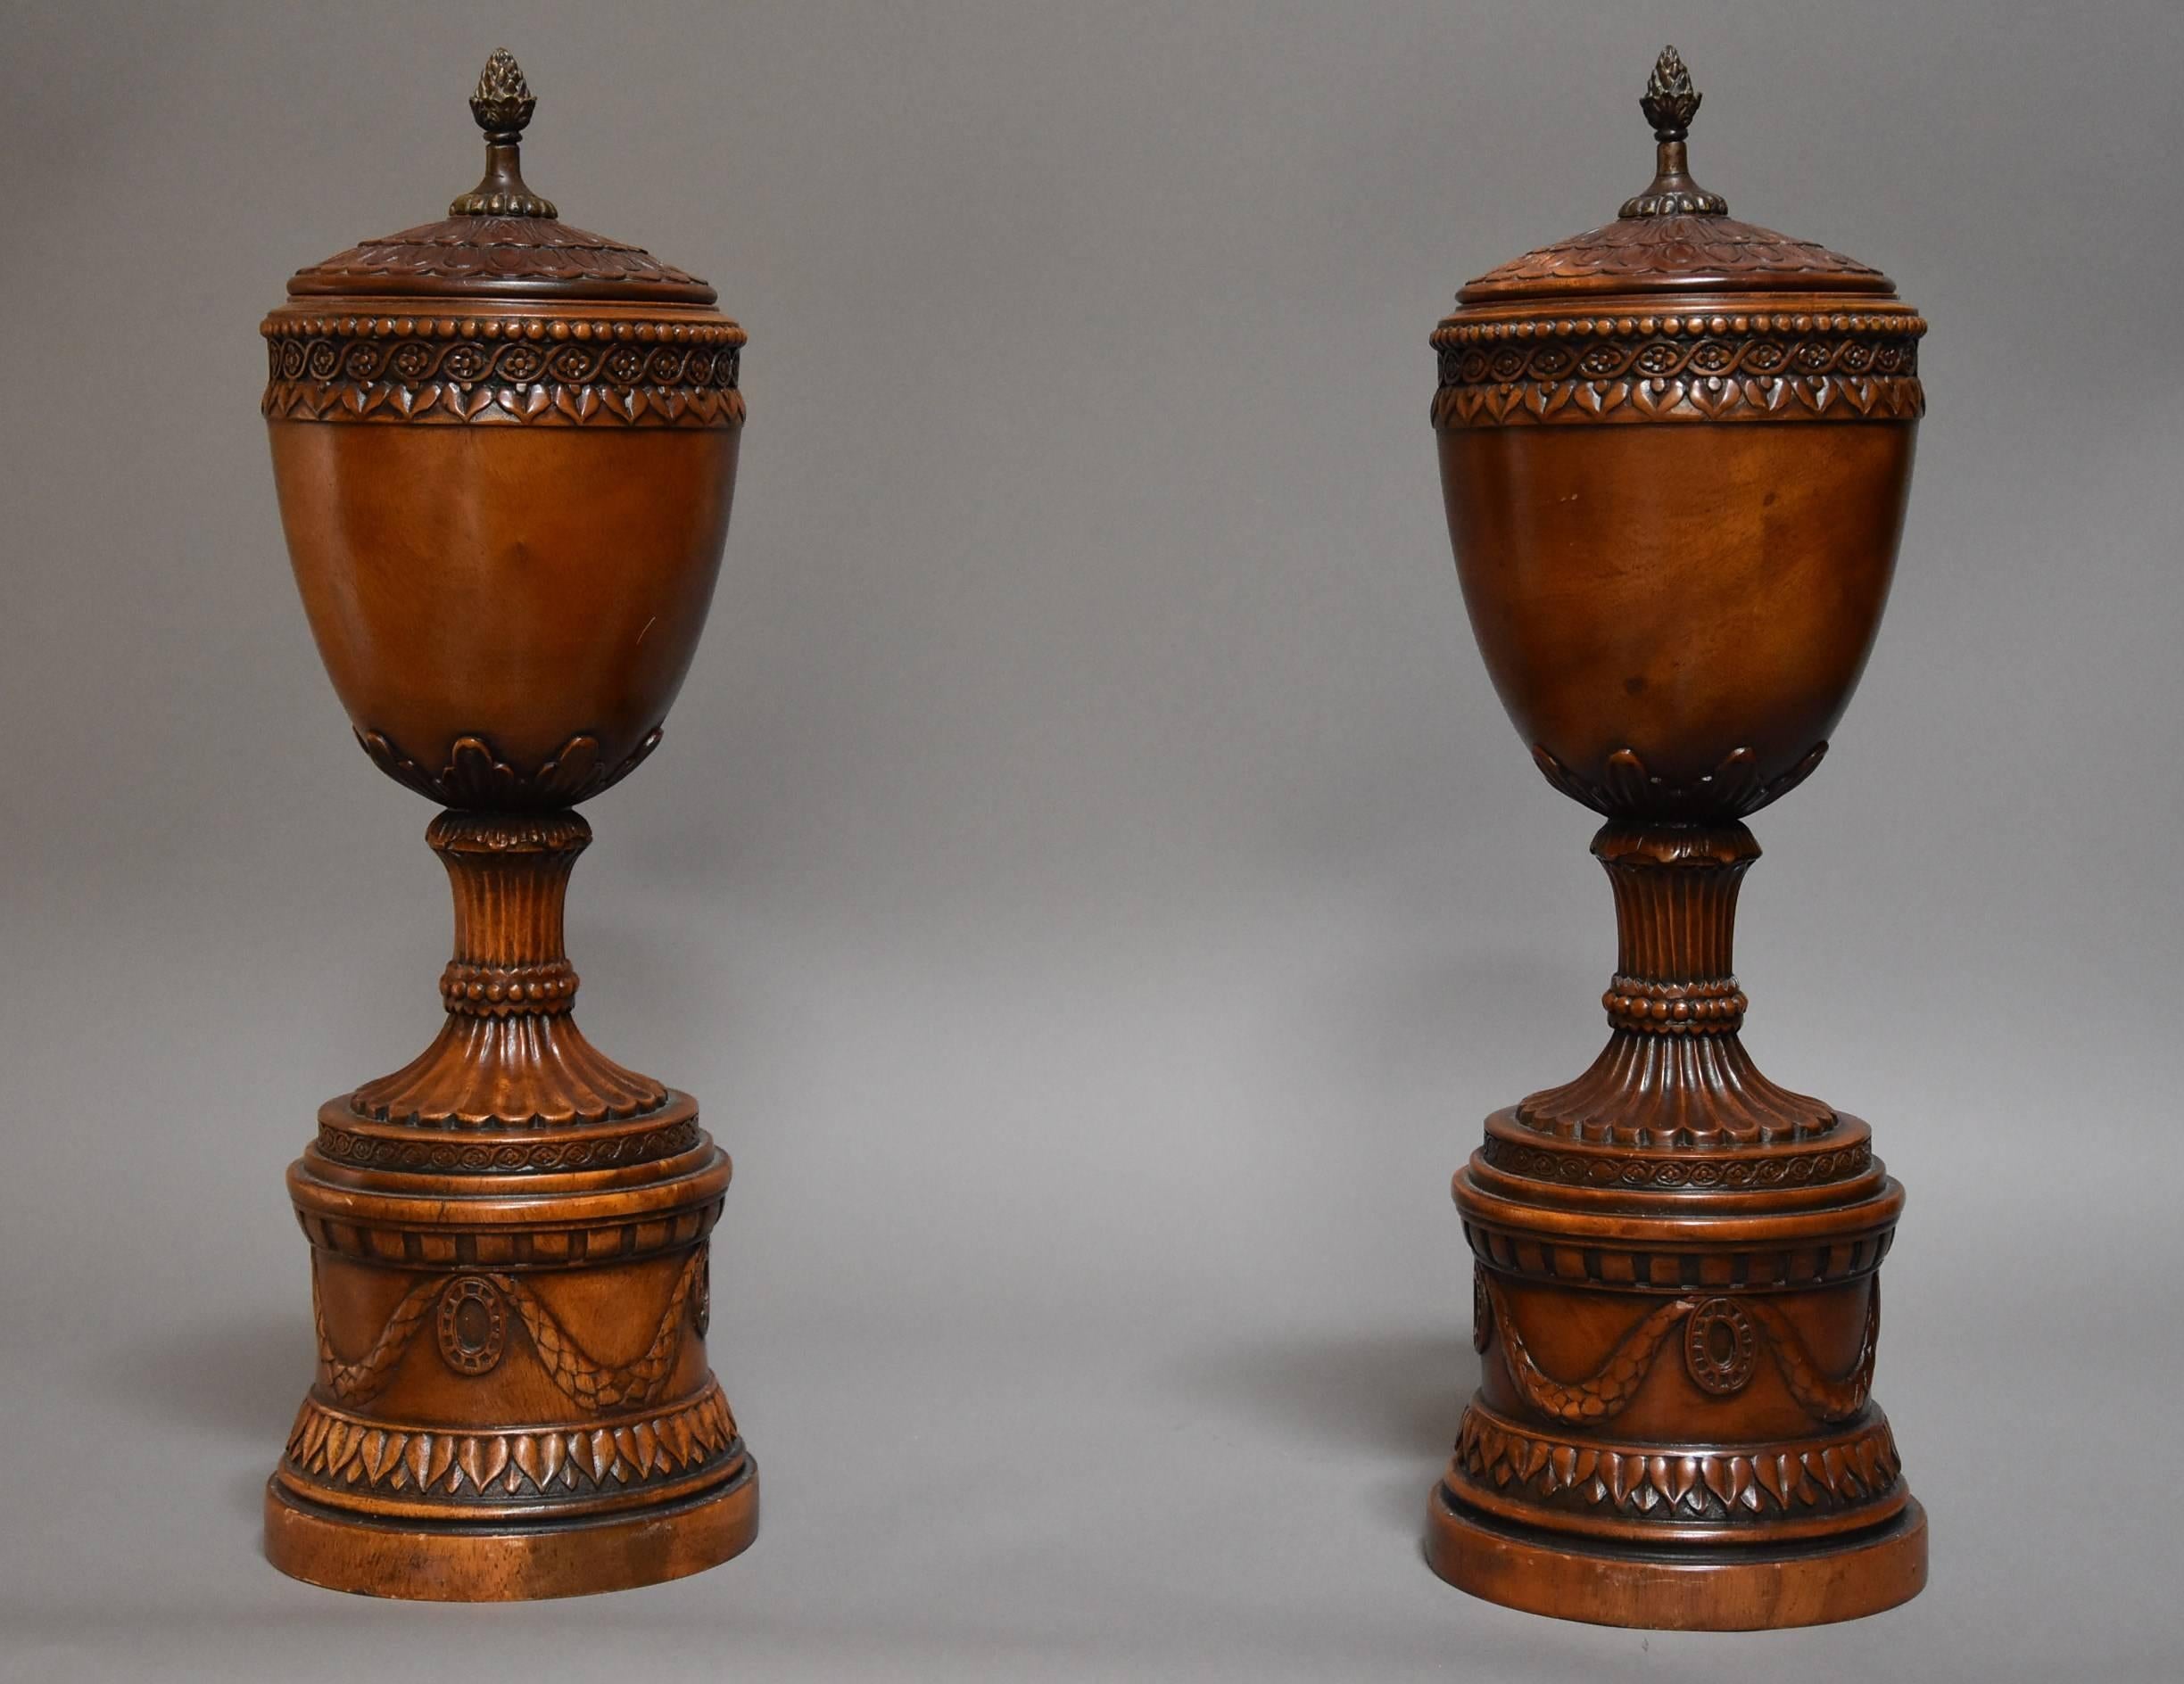 A finely carved pair of early 20th century decorative wooden urns with lids.

This pair of urns each consist of a lid with pineapple finial surrounded by finely carved decoration leading down to a rim with carved ball decoration and entwined